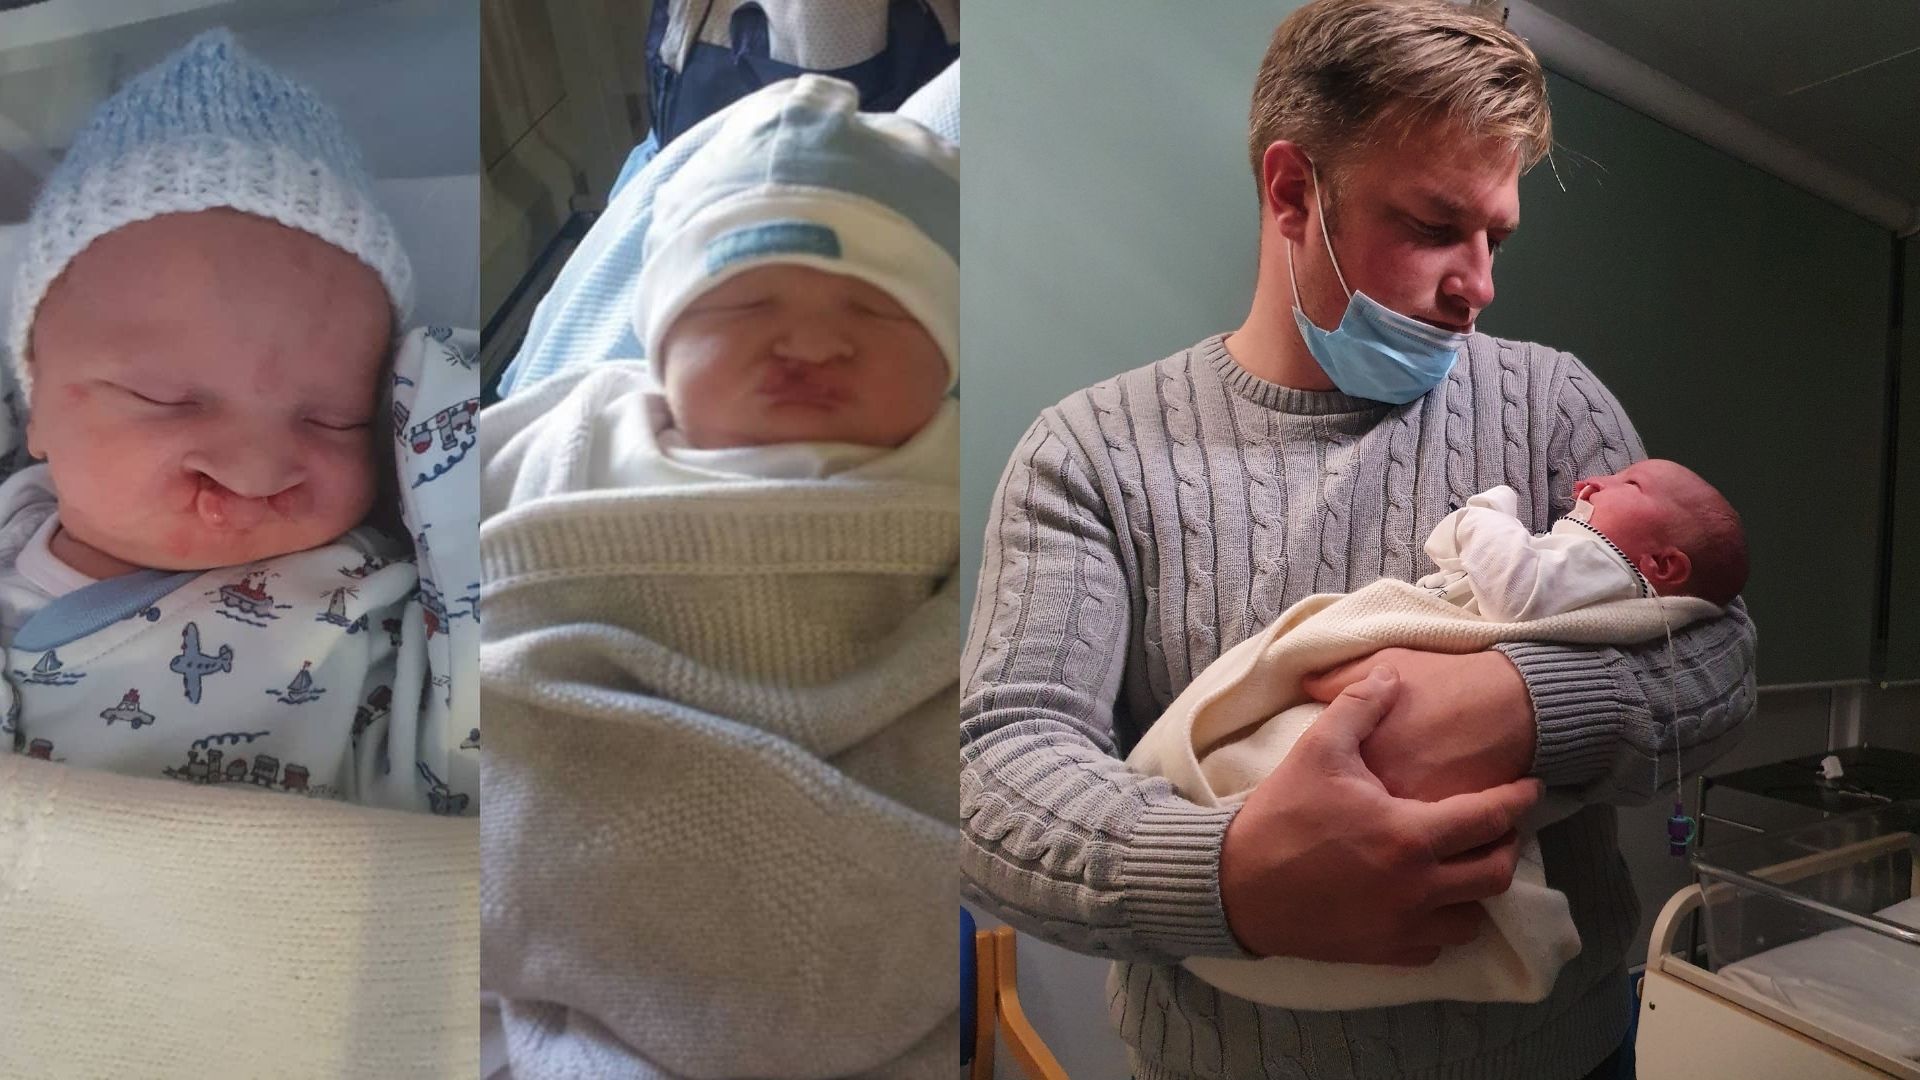 Left: Two babies, side by side, with a cleft lip and palate. Both are sleeping and wearing beanies, onesies with a blanket over them. Right: A man, late 30s, wearing a grey knit and a face mask holds his newborn baby Jude, who's wearing a onesie and is wrapped in a yellow blanket.